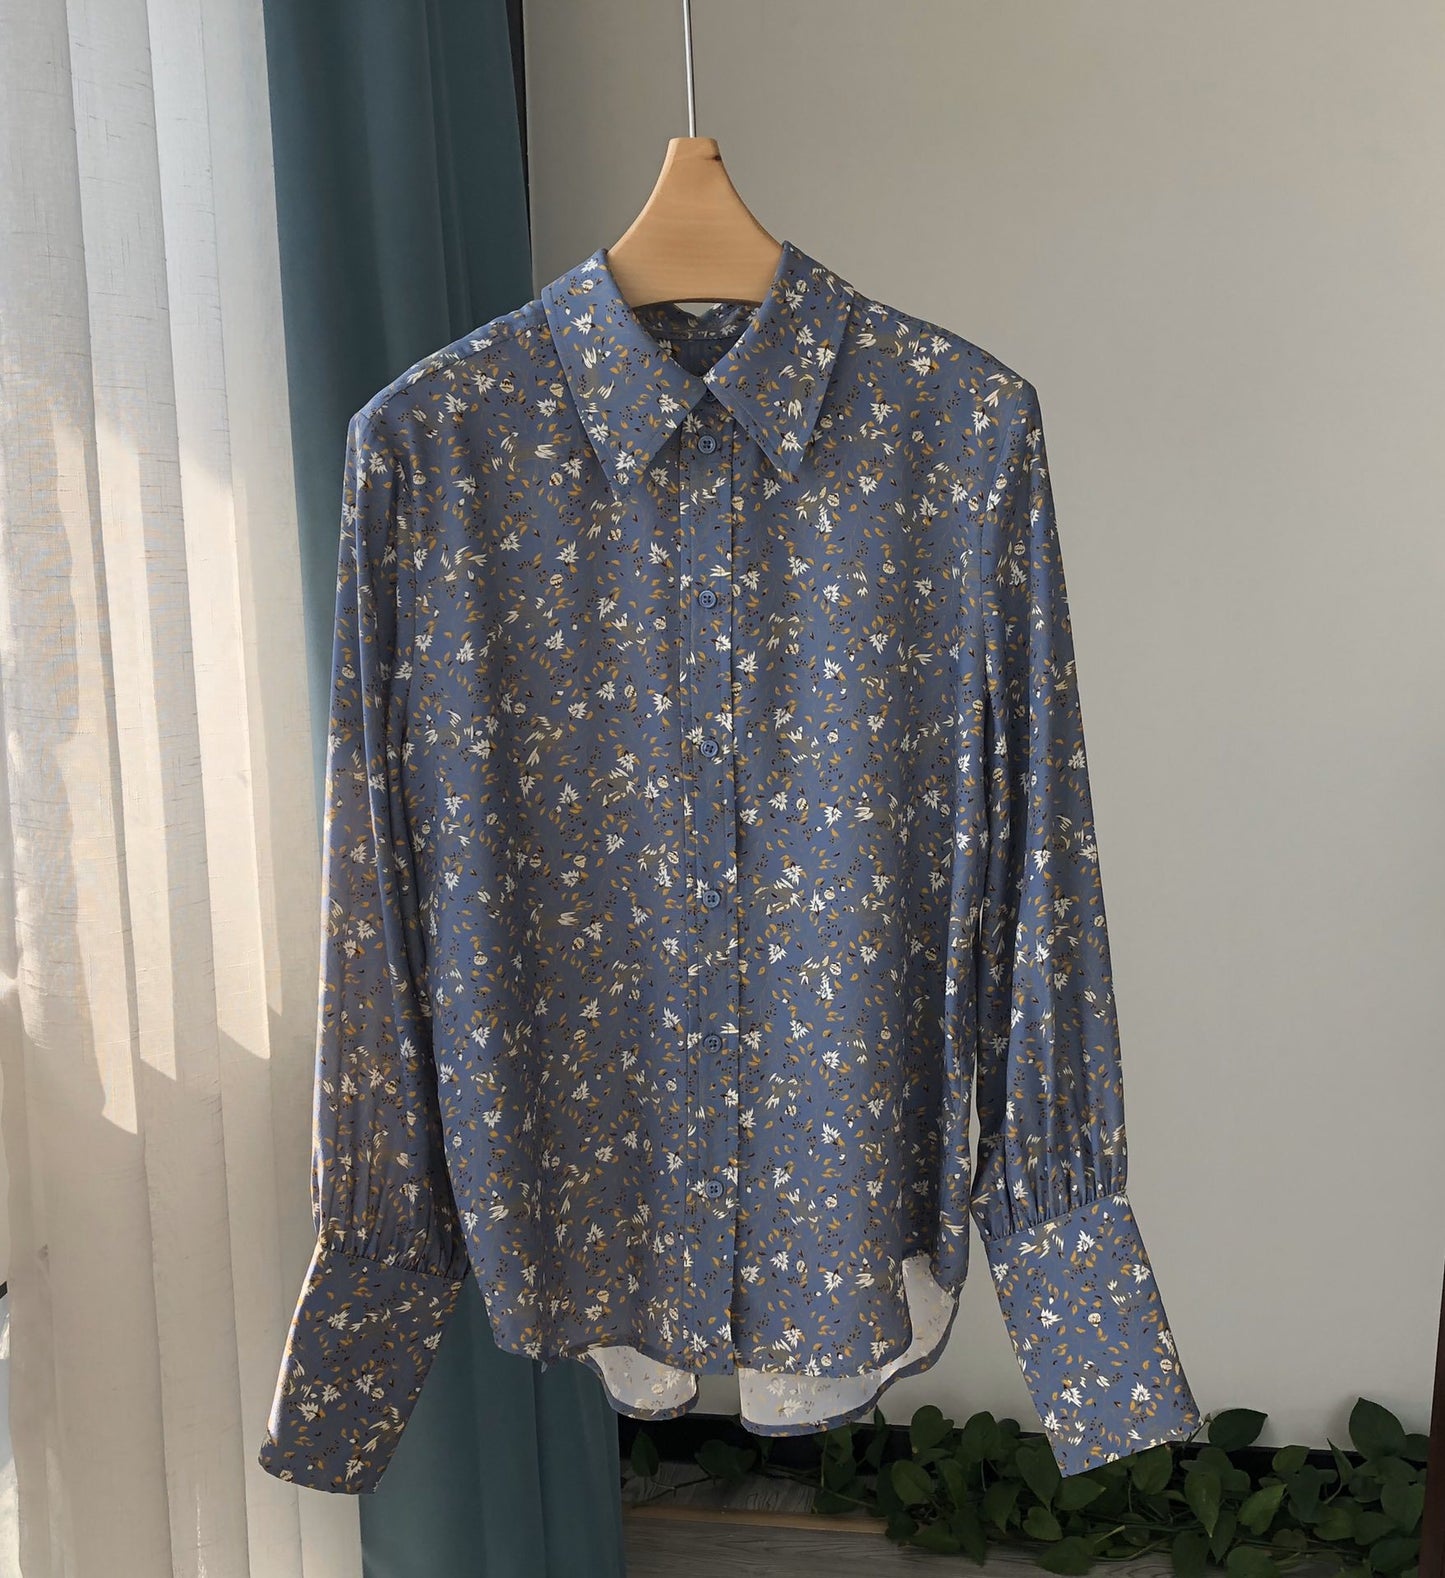 Fresh and Elegant Flower and Bird Print Heavy Satin Silk Long-Sleeved Shirt with in Gray-Blue Tone